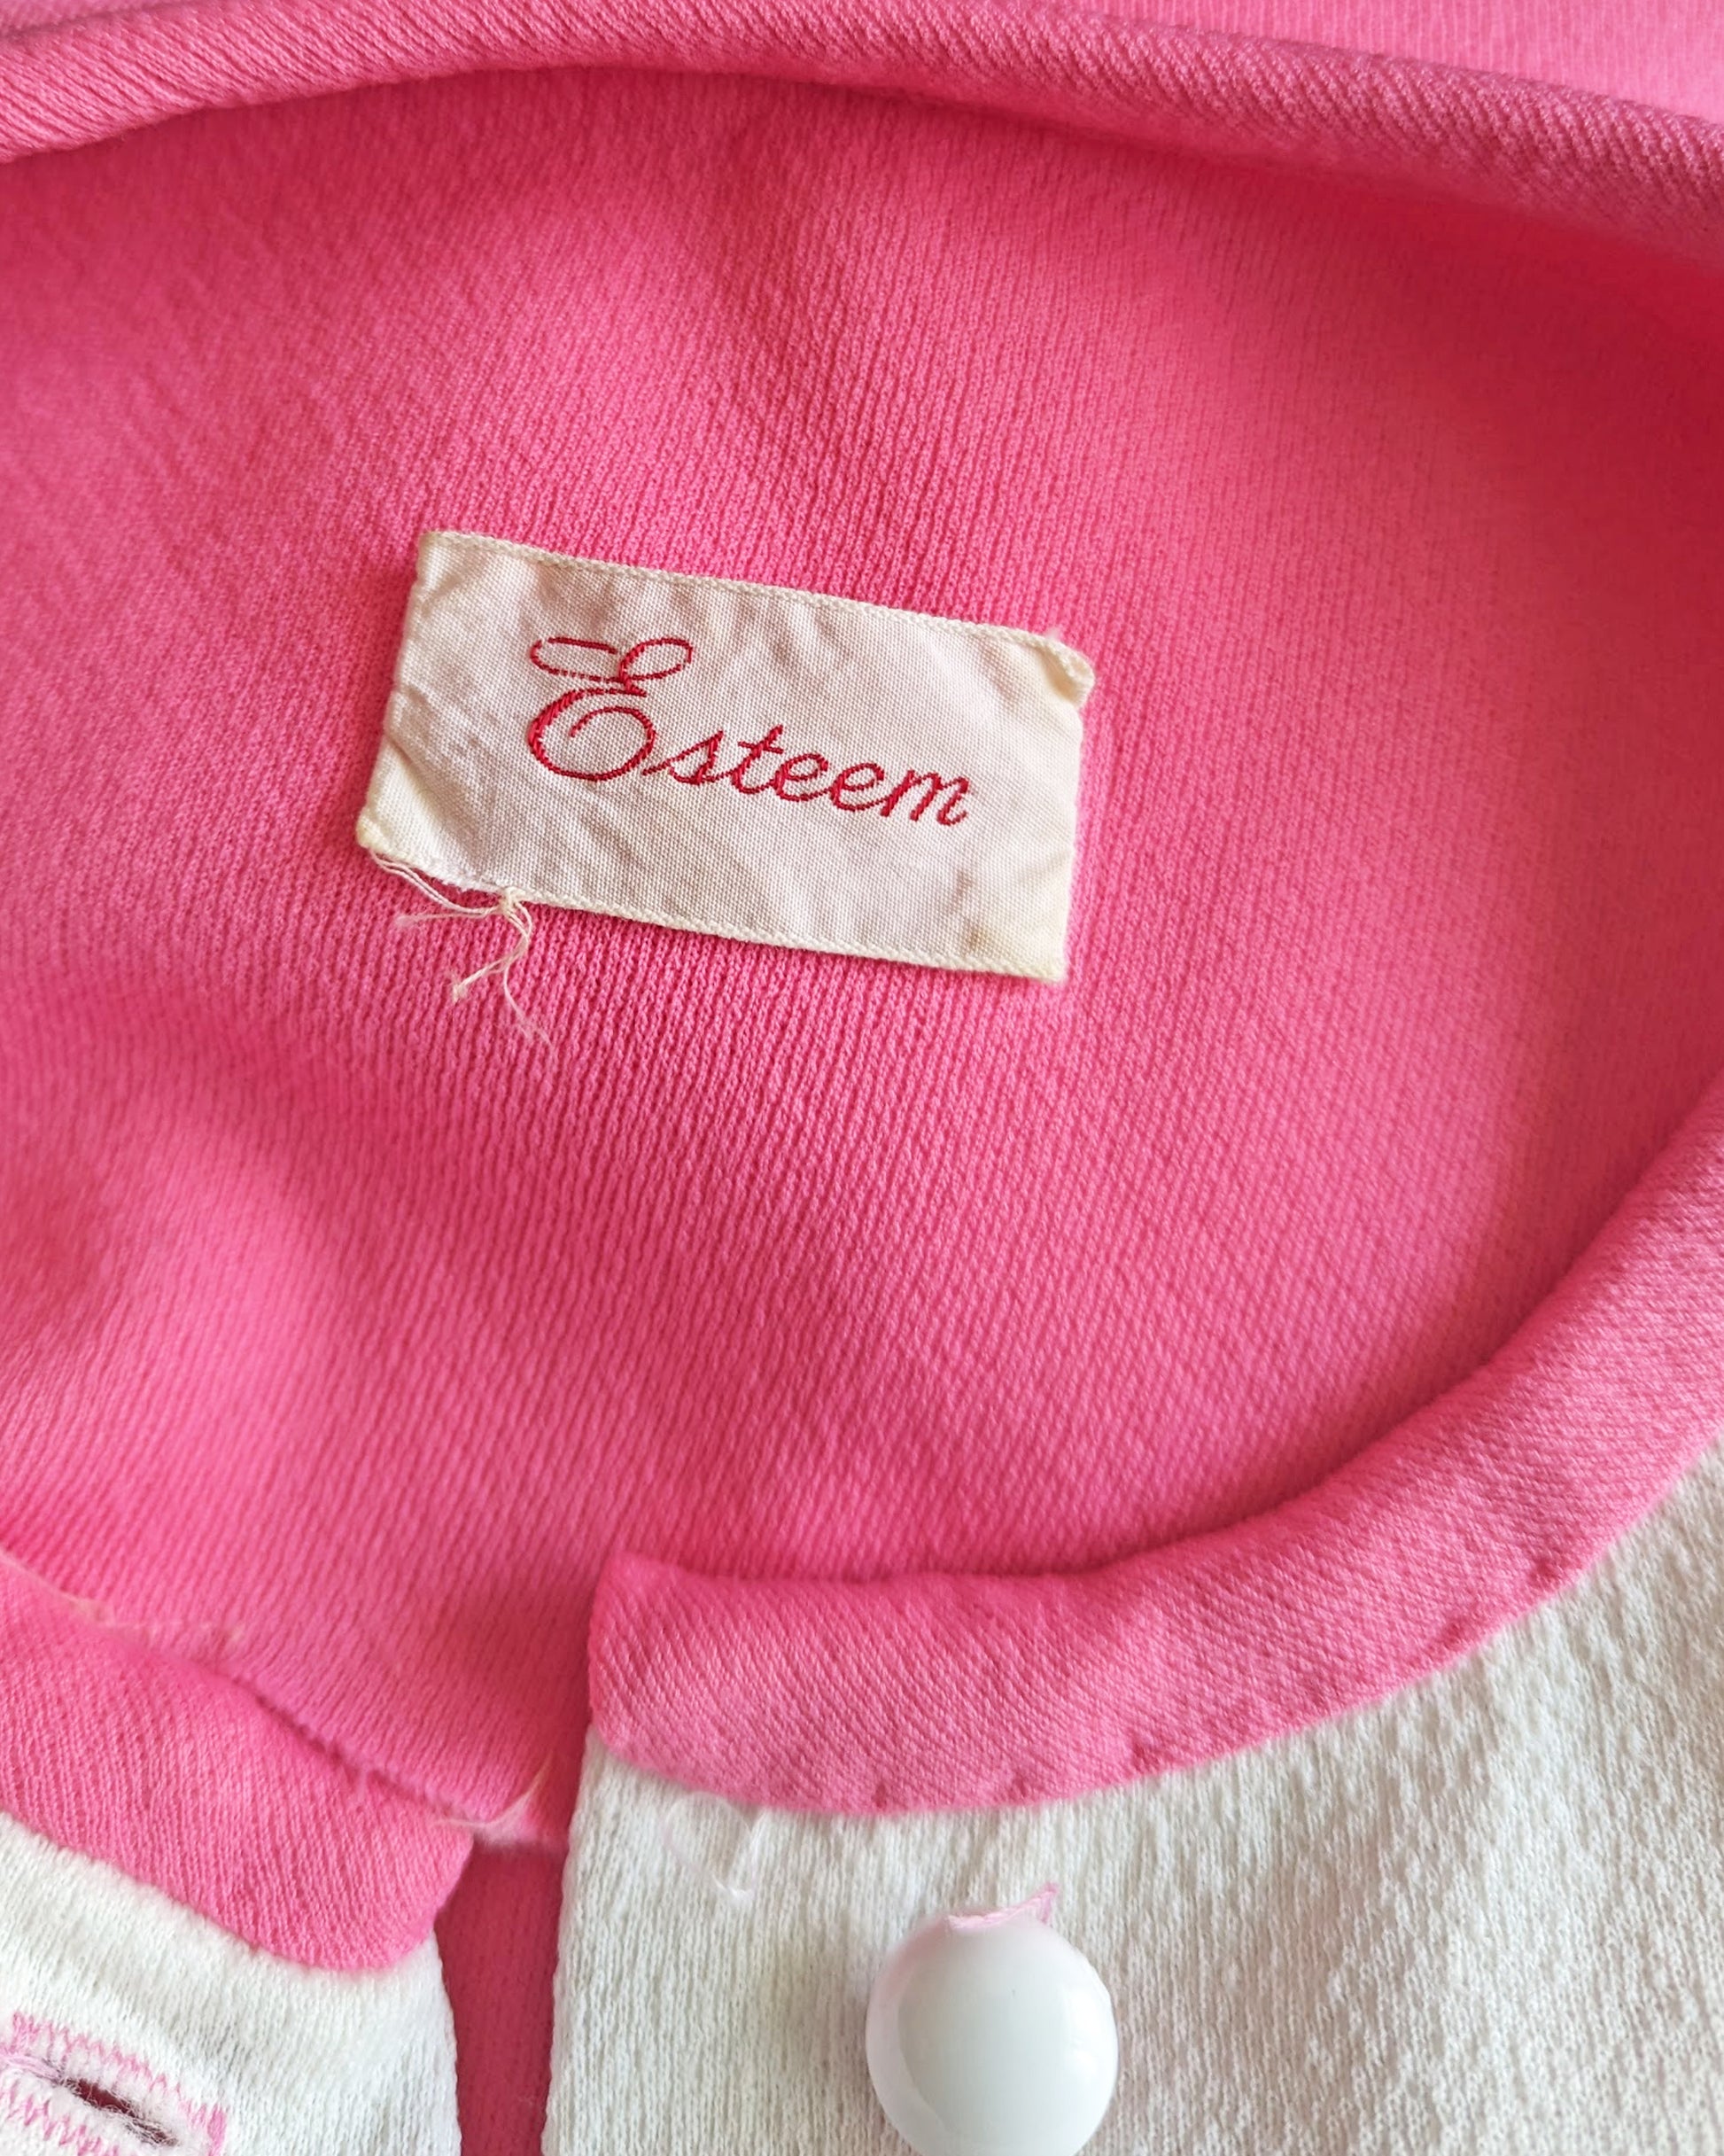 close up of the tag which says Esteem